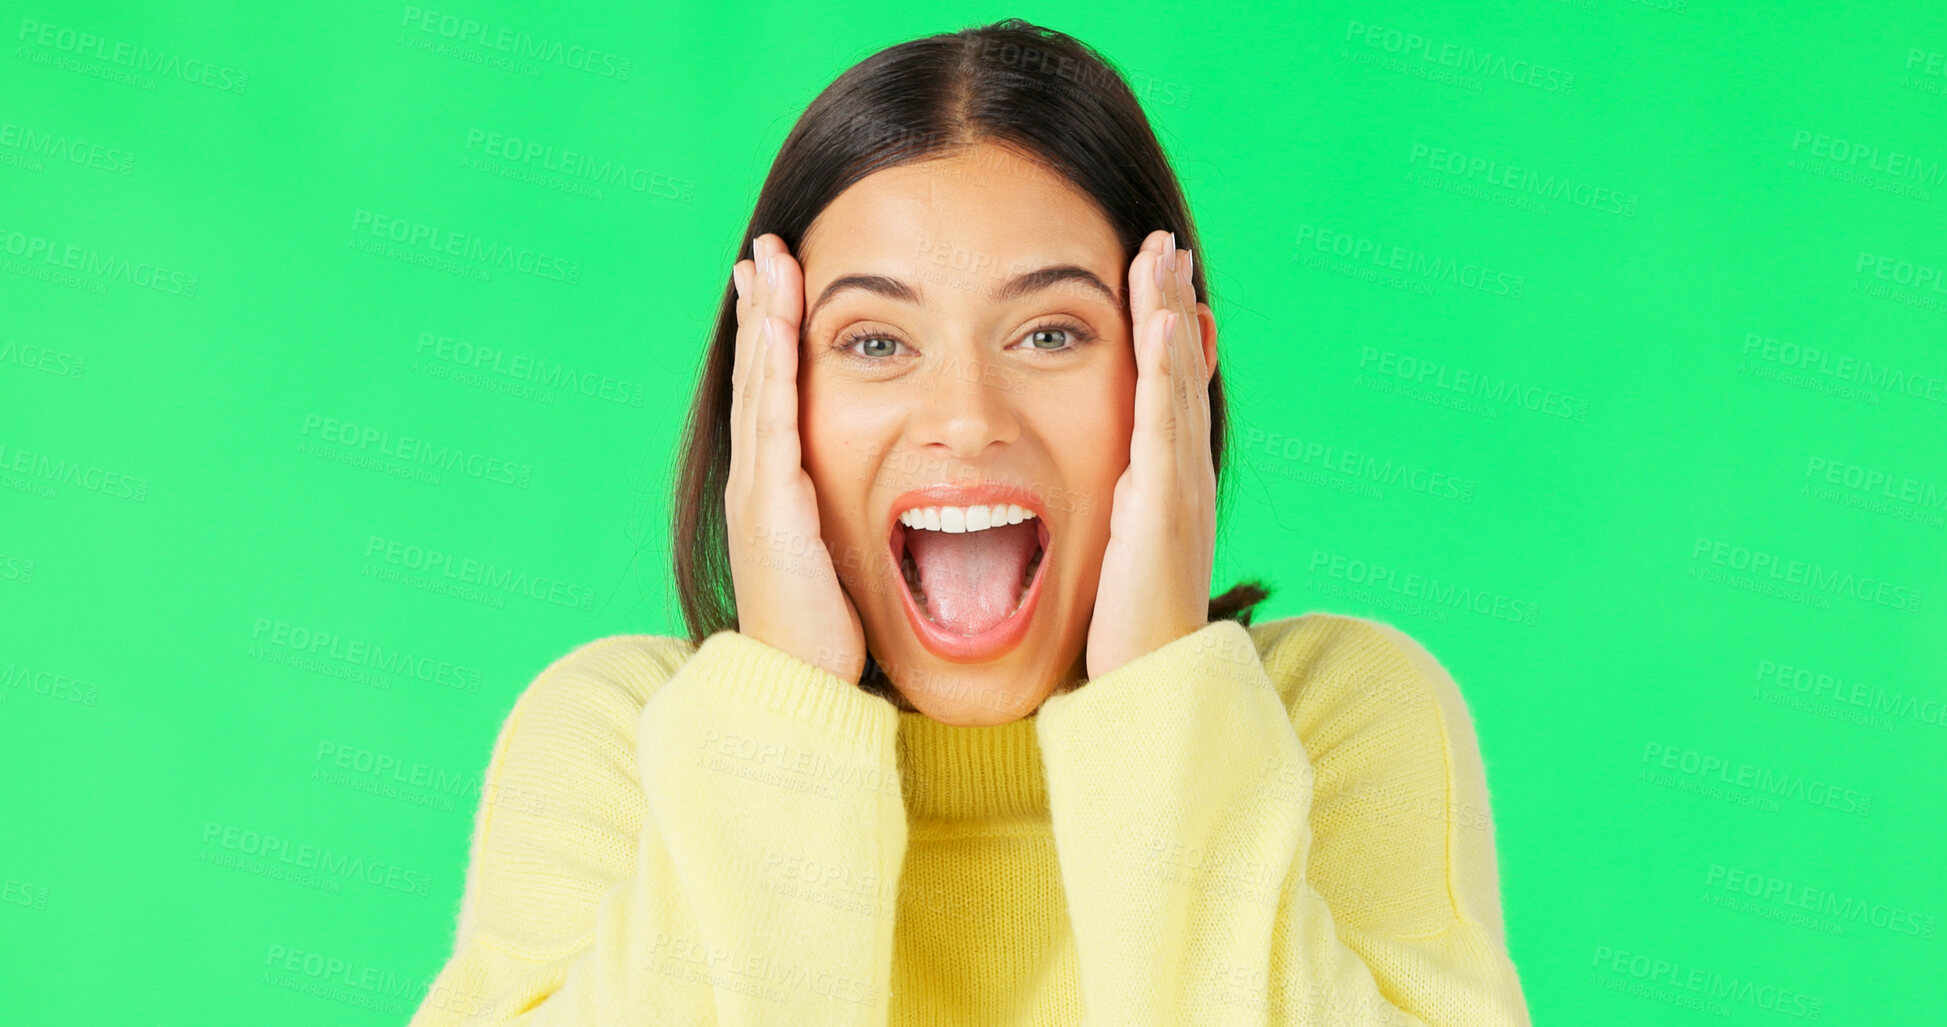 Buy stock photo Wow, surprise or portrait of a happy woman on green screen for news, announcement or information in studio. Excited girl, smile or face of a female person with shocked, emoji or omg facial expression